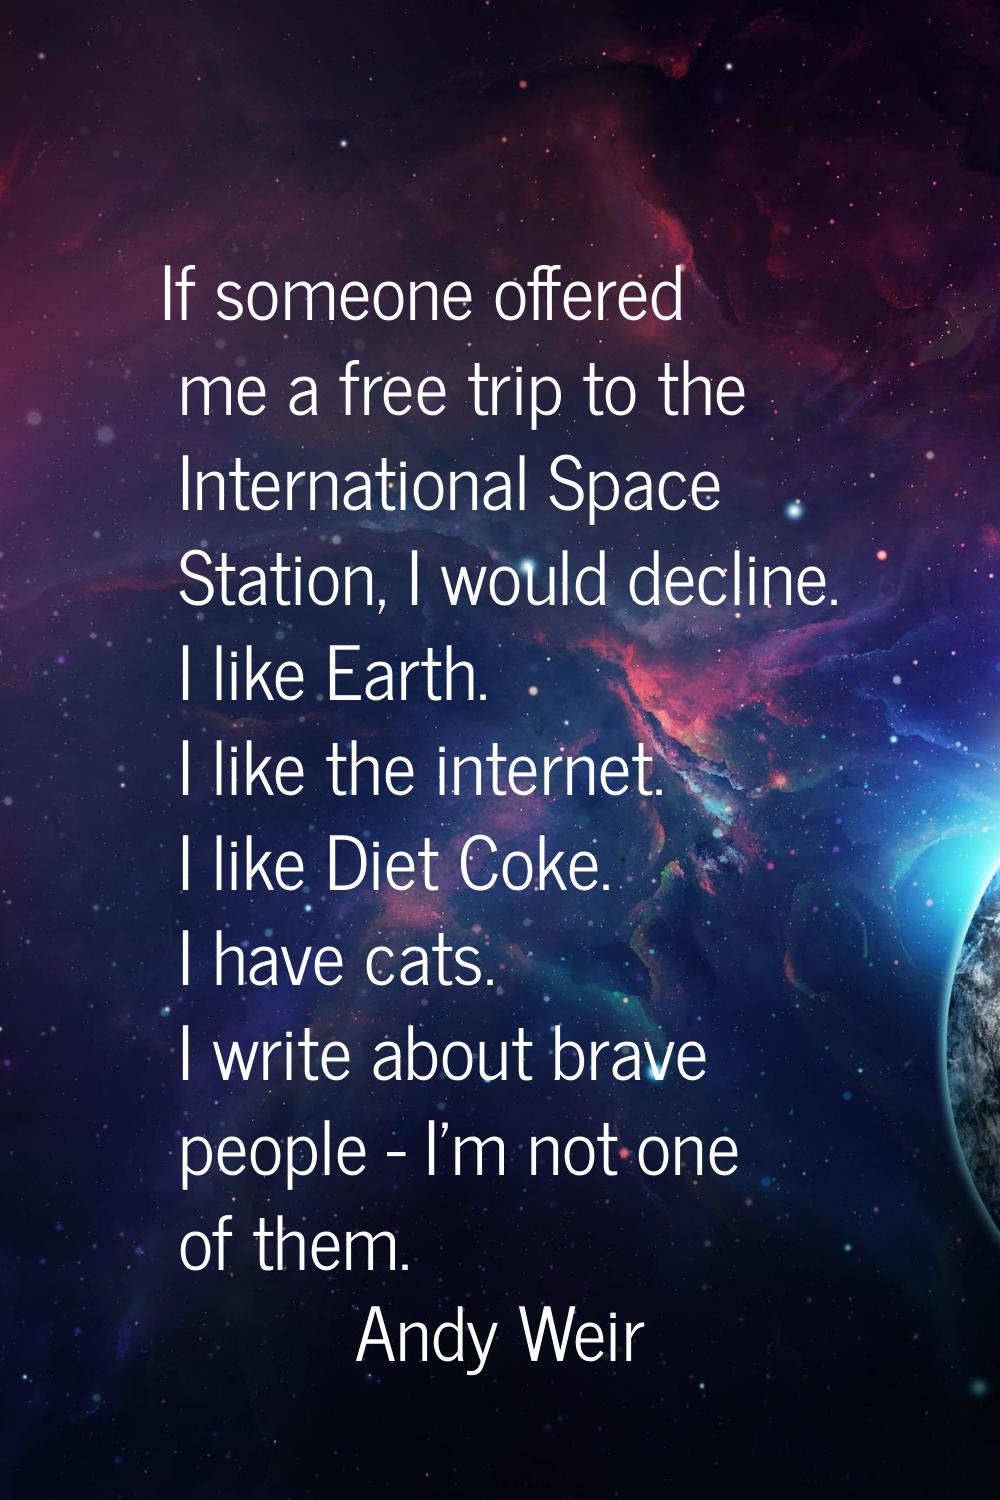 If someone offered me a free trip to the International Space Station, I would decline. I like Earth